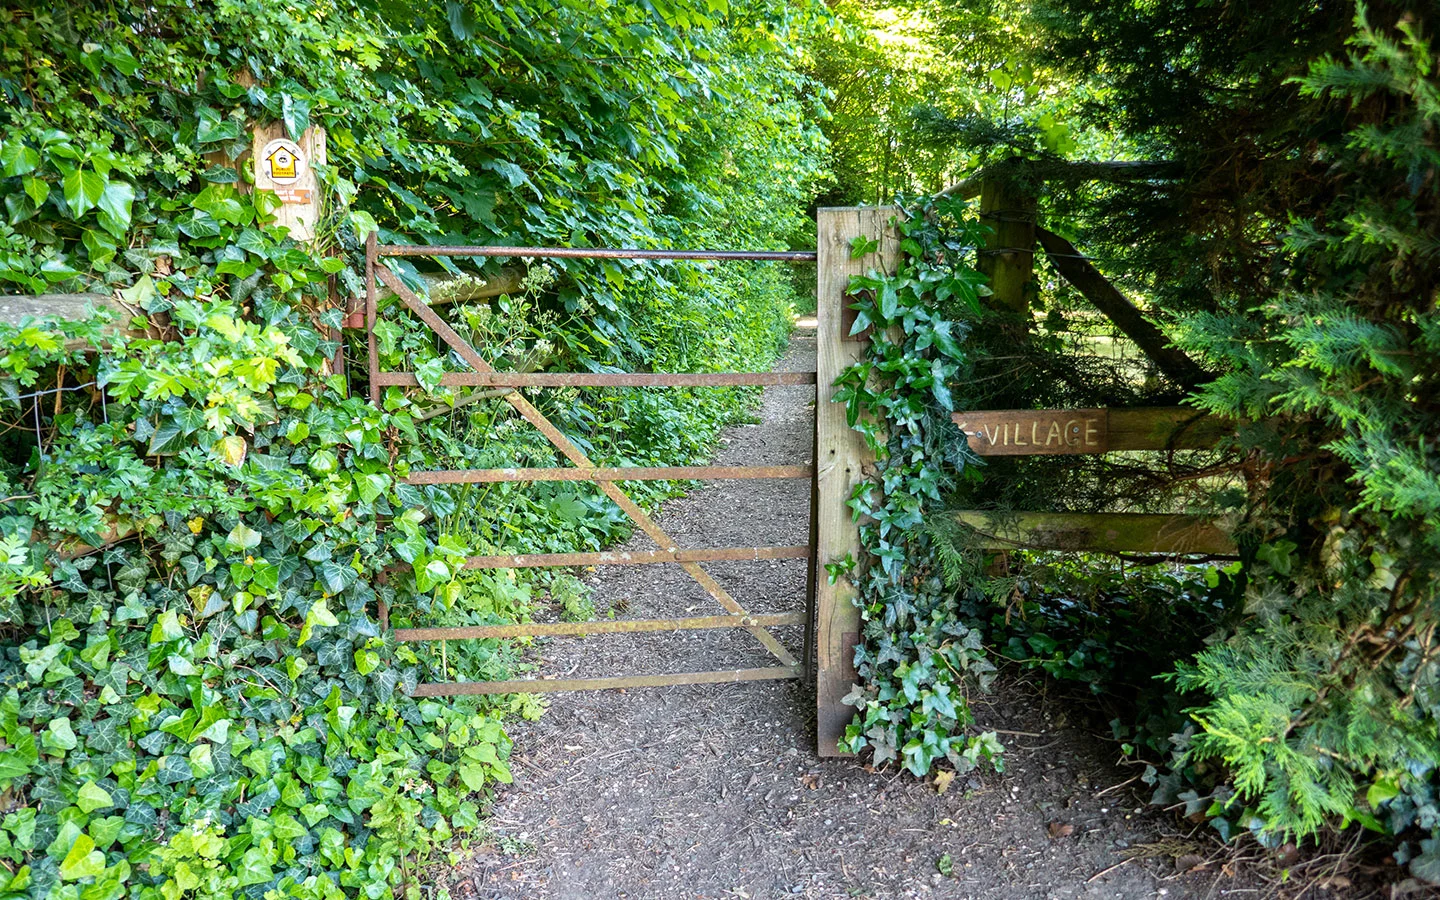 Gate and path to Lower Slaughter